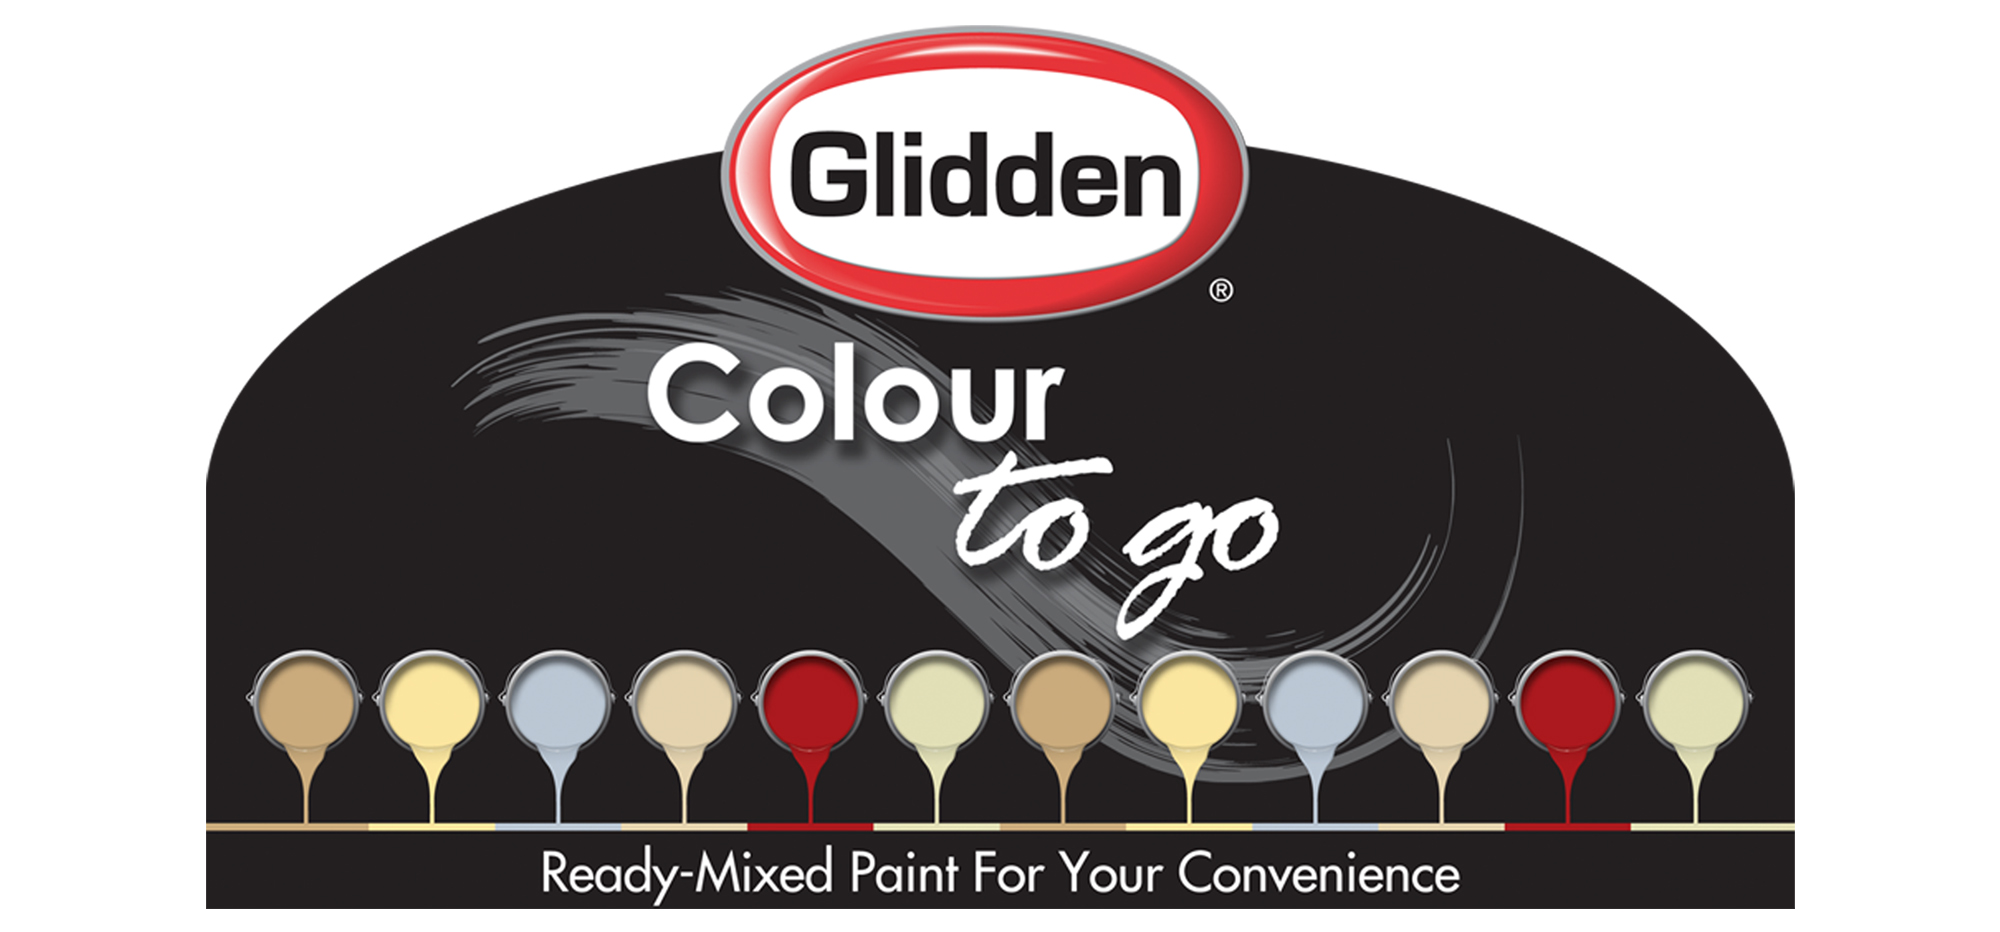 Glidden "Colour To Go" Signage Showing Multiple Cans of Paint each dripping a different paint colour.